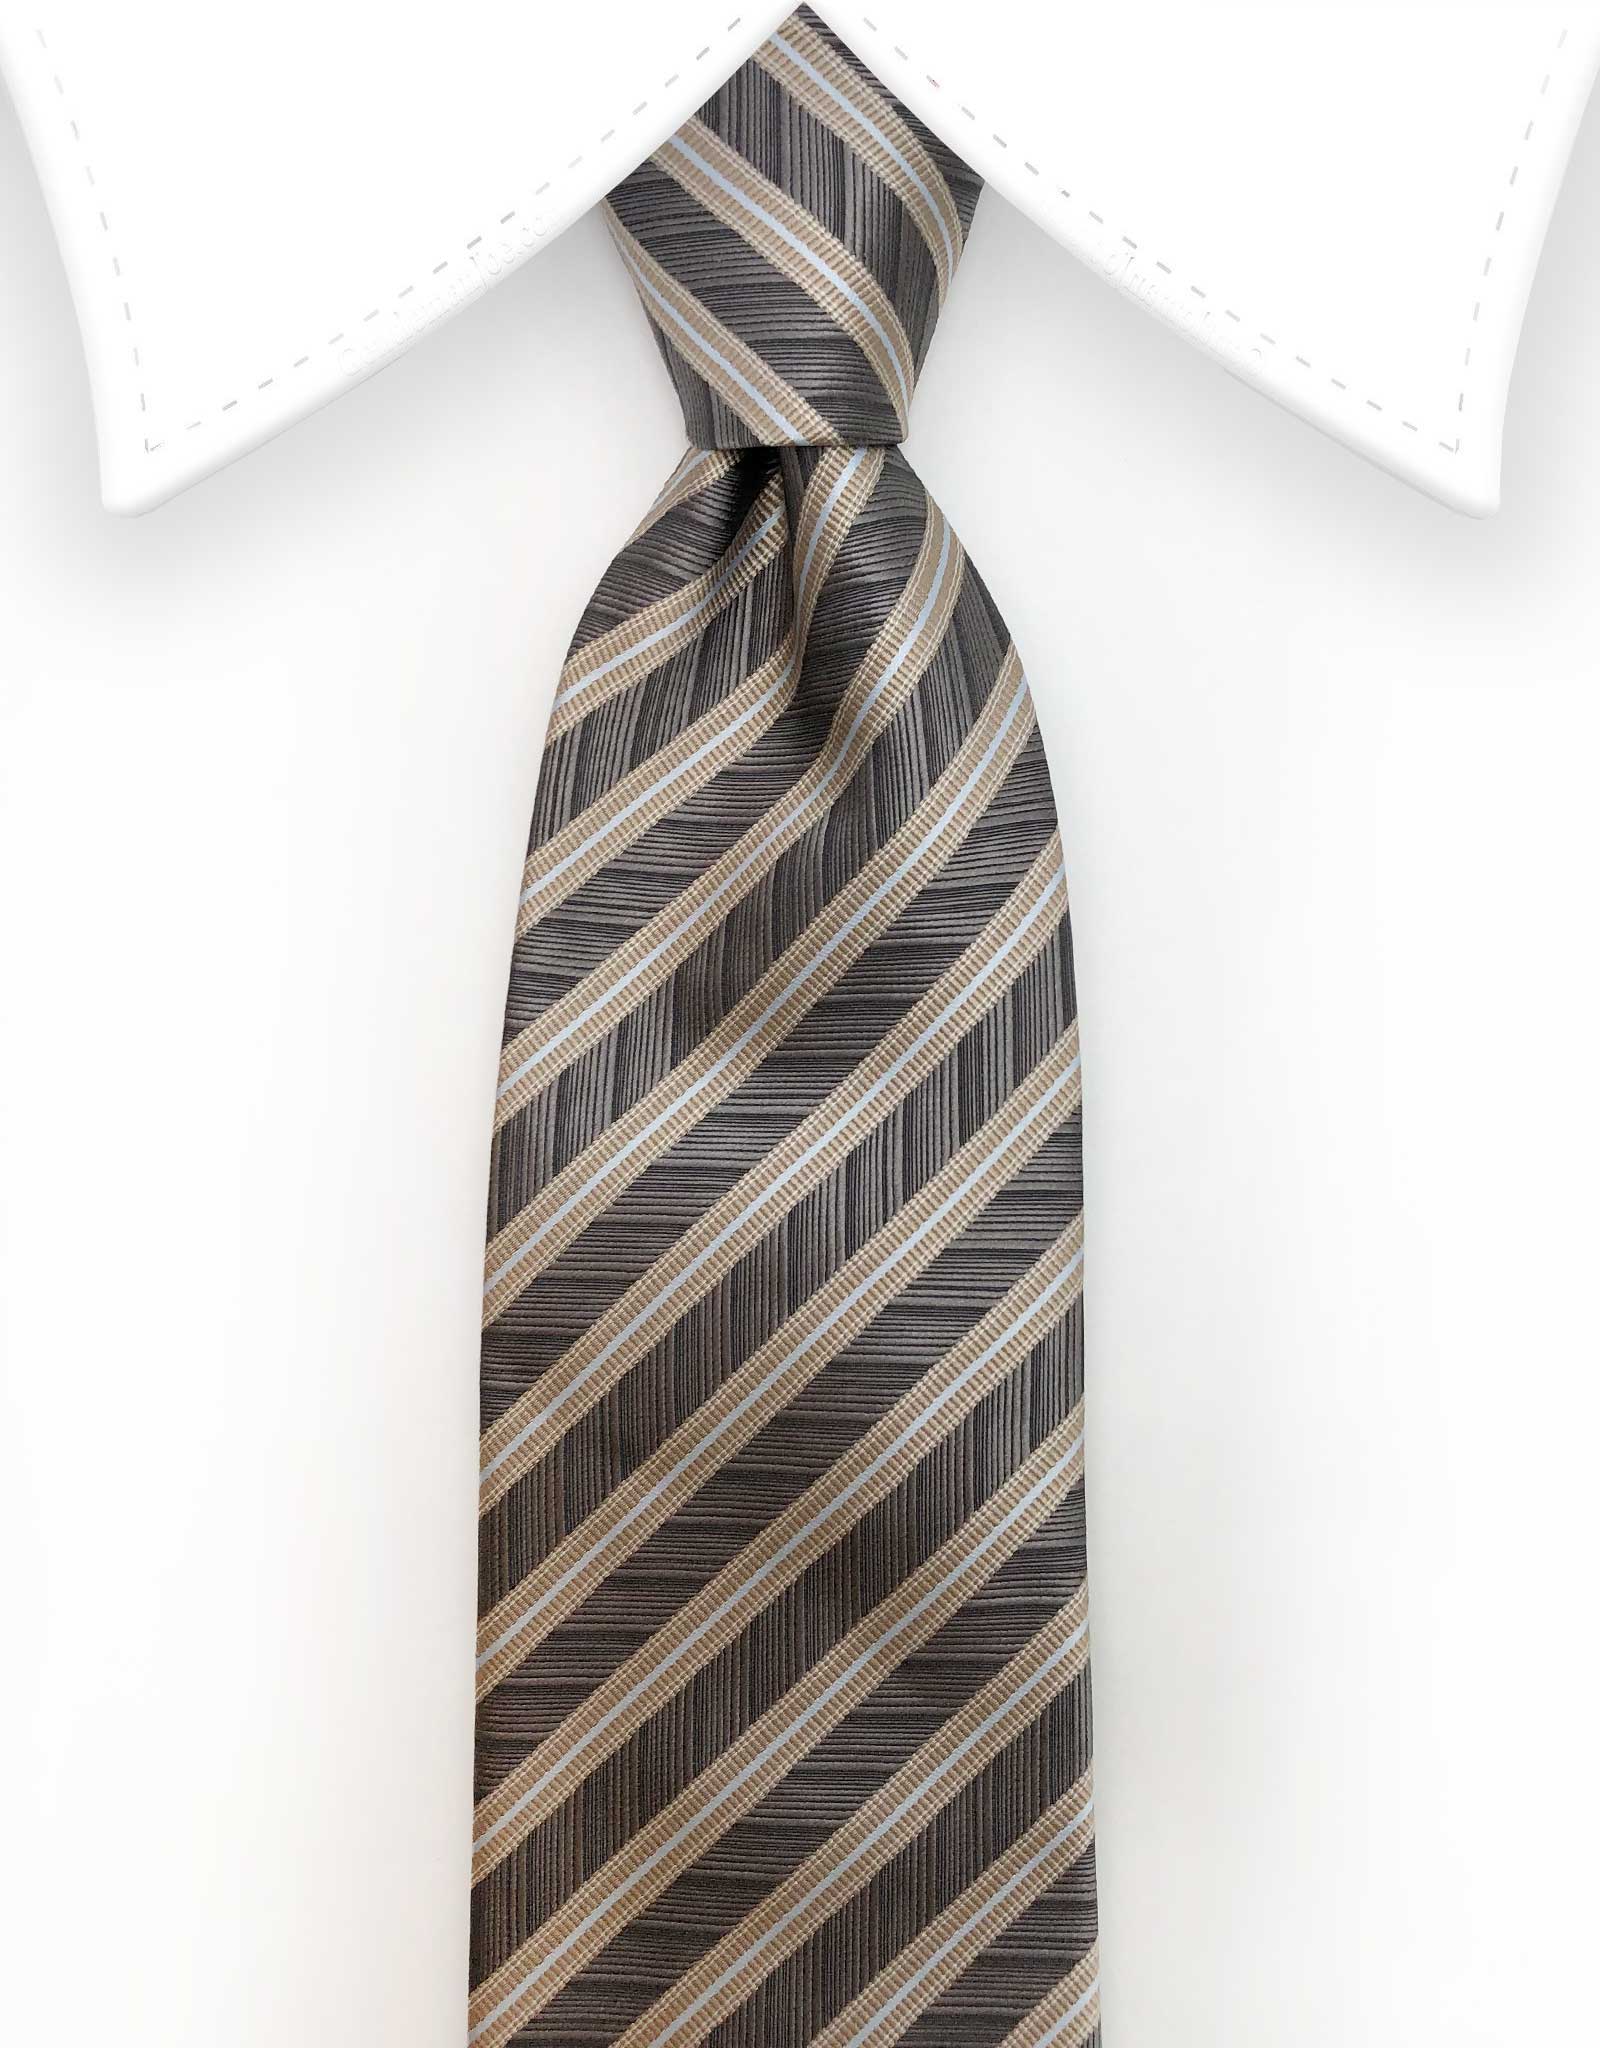 Gold, Silver and Taupe Striped Tie – GentlemanJoe